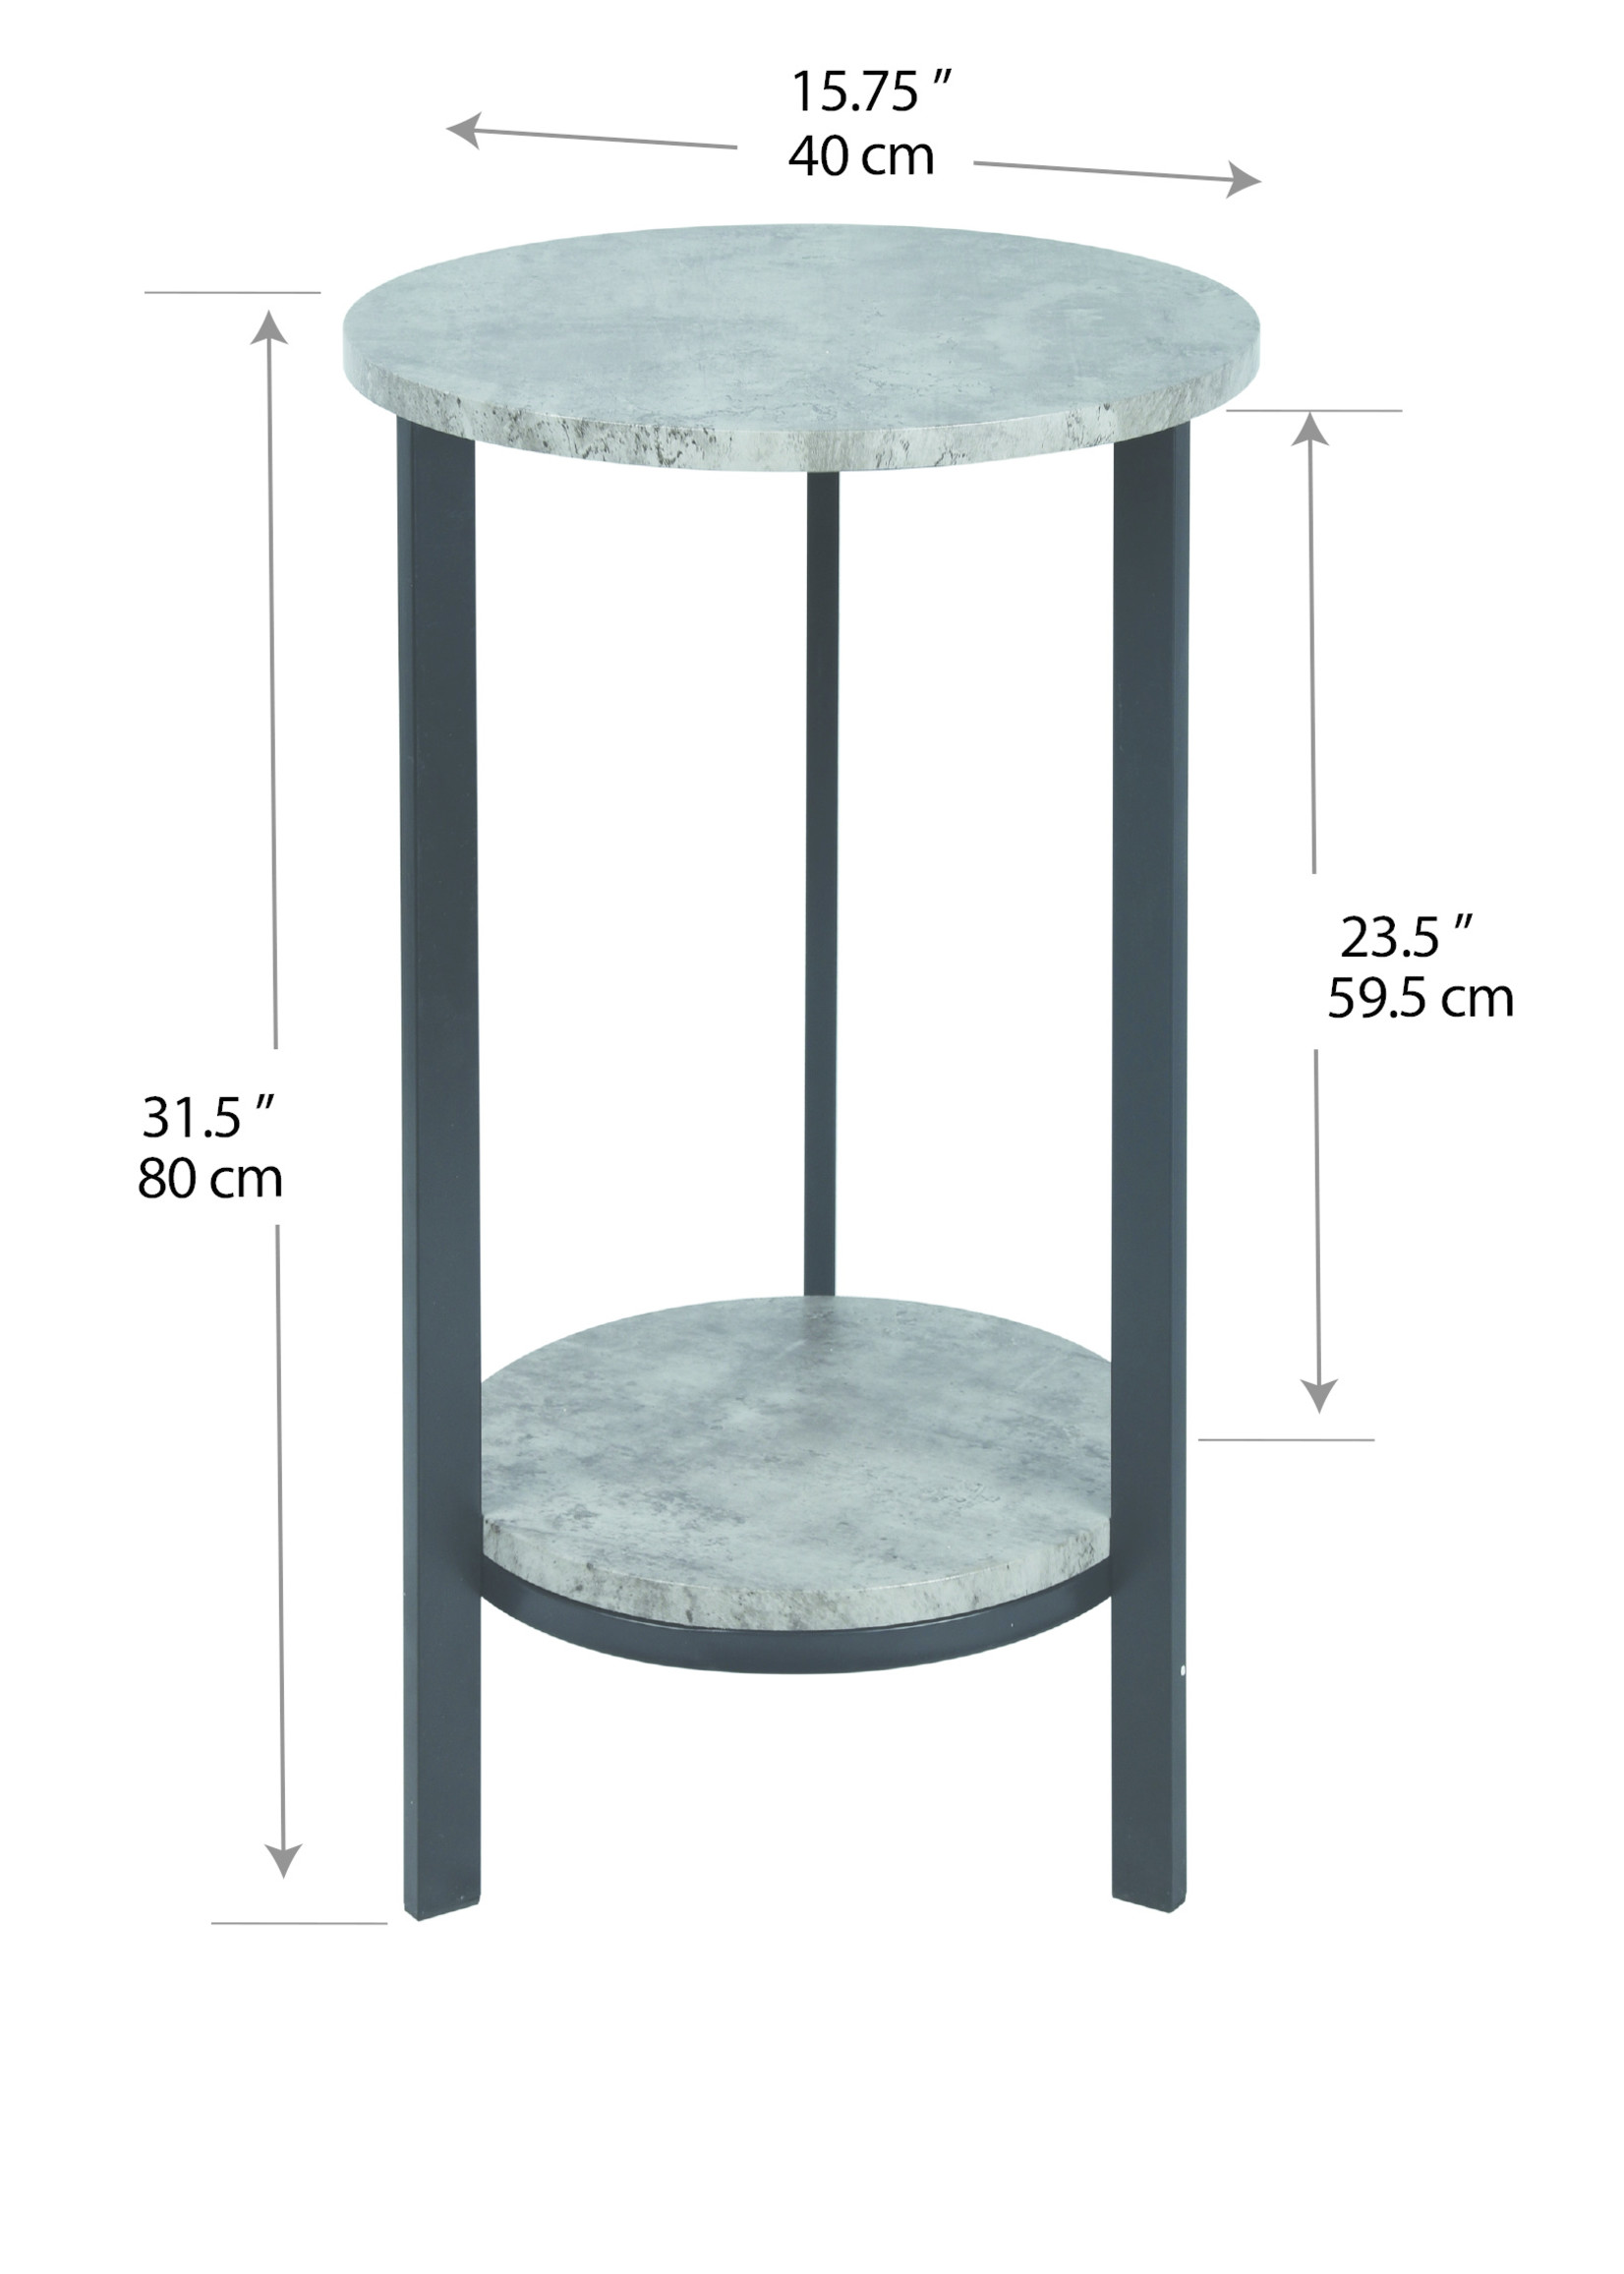 ITY INTERNATIONAL Grey Cement Look Accent Table, Plant Stand Pedestal, Round 32-inch